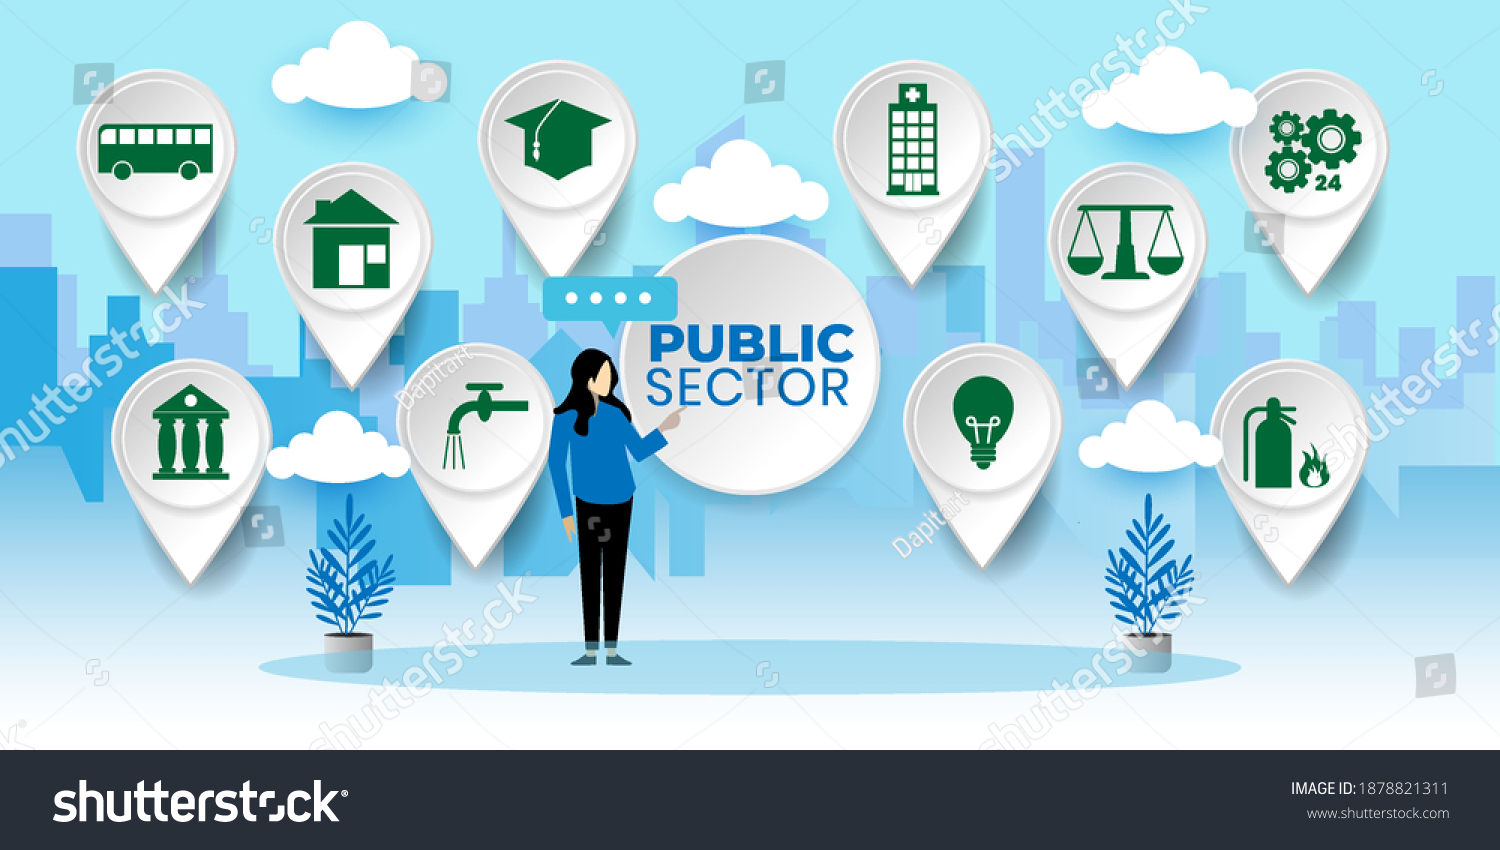 Governmental System Citizen Service Concept. Public Sector Government People Business Concept With icons. Cartoon Vector People Illustration #1878821311